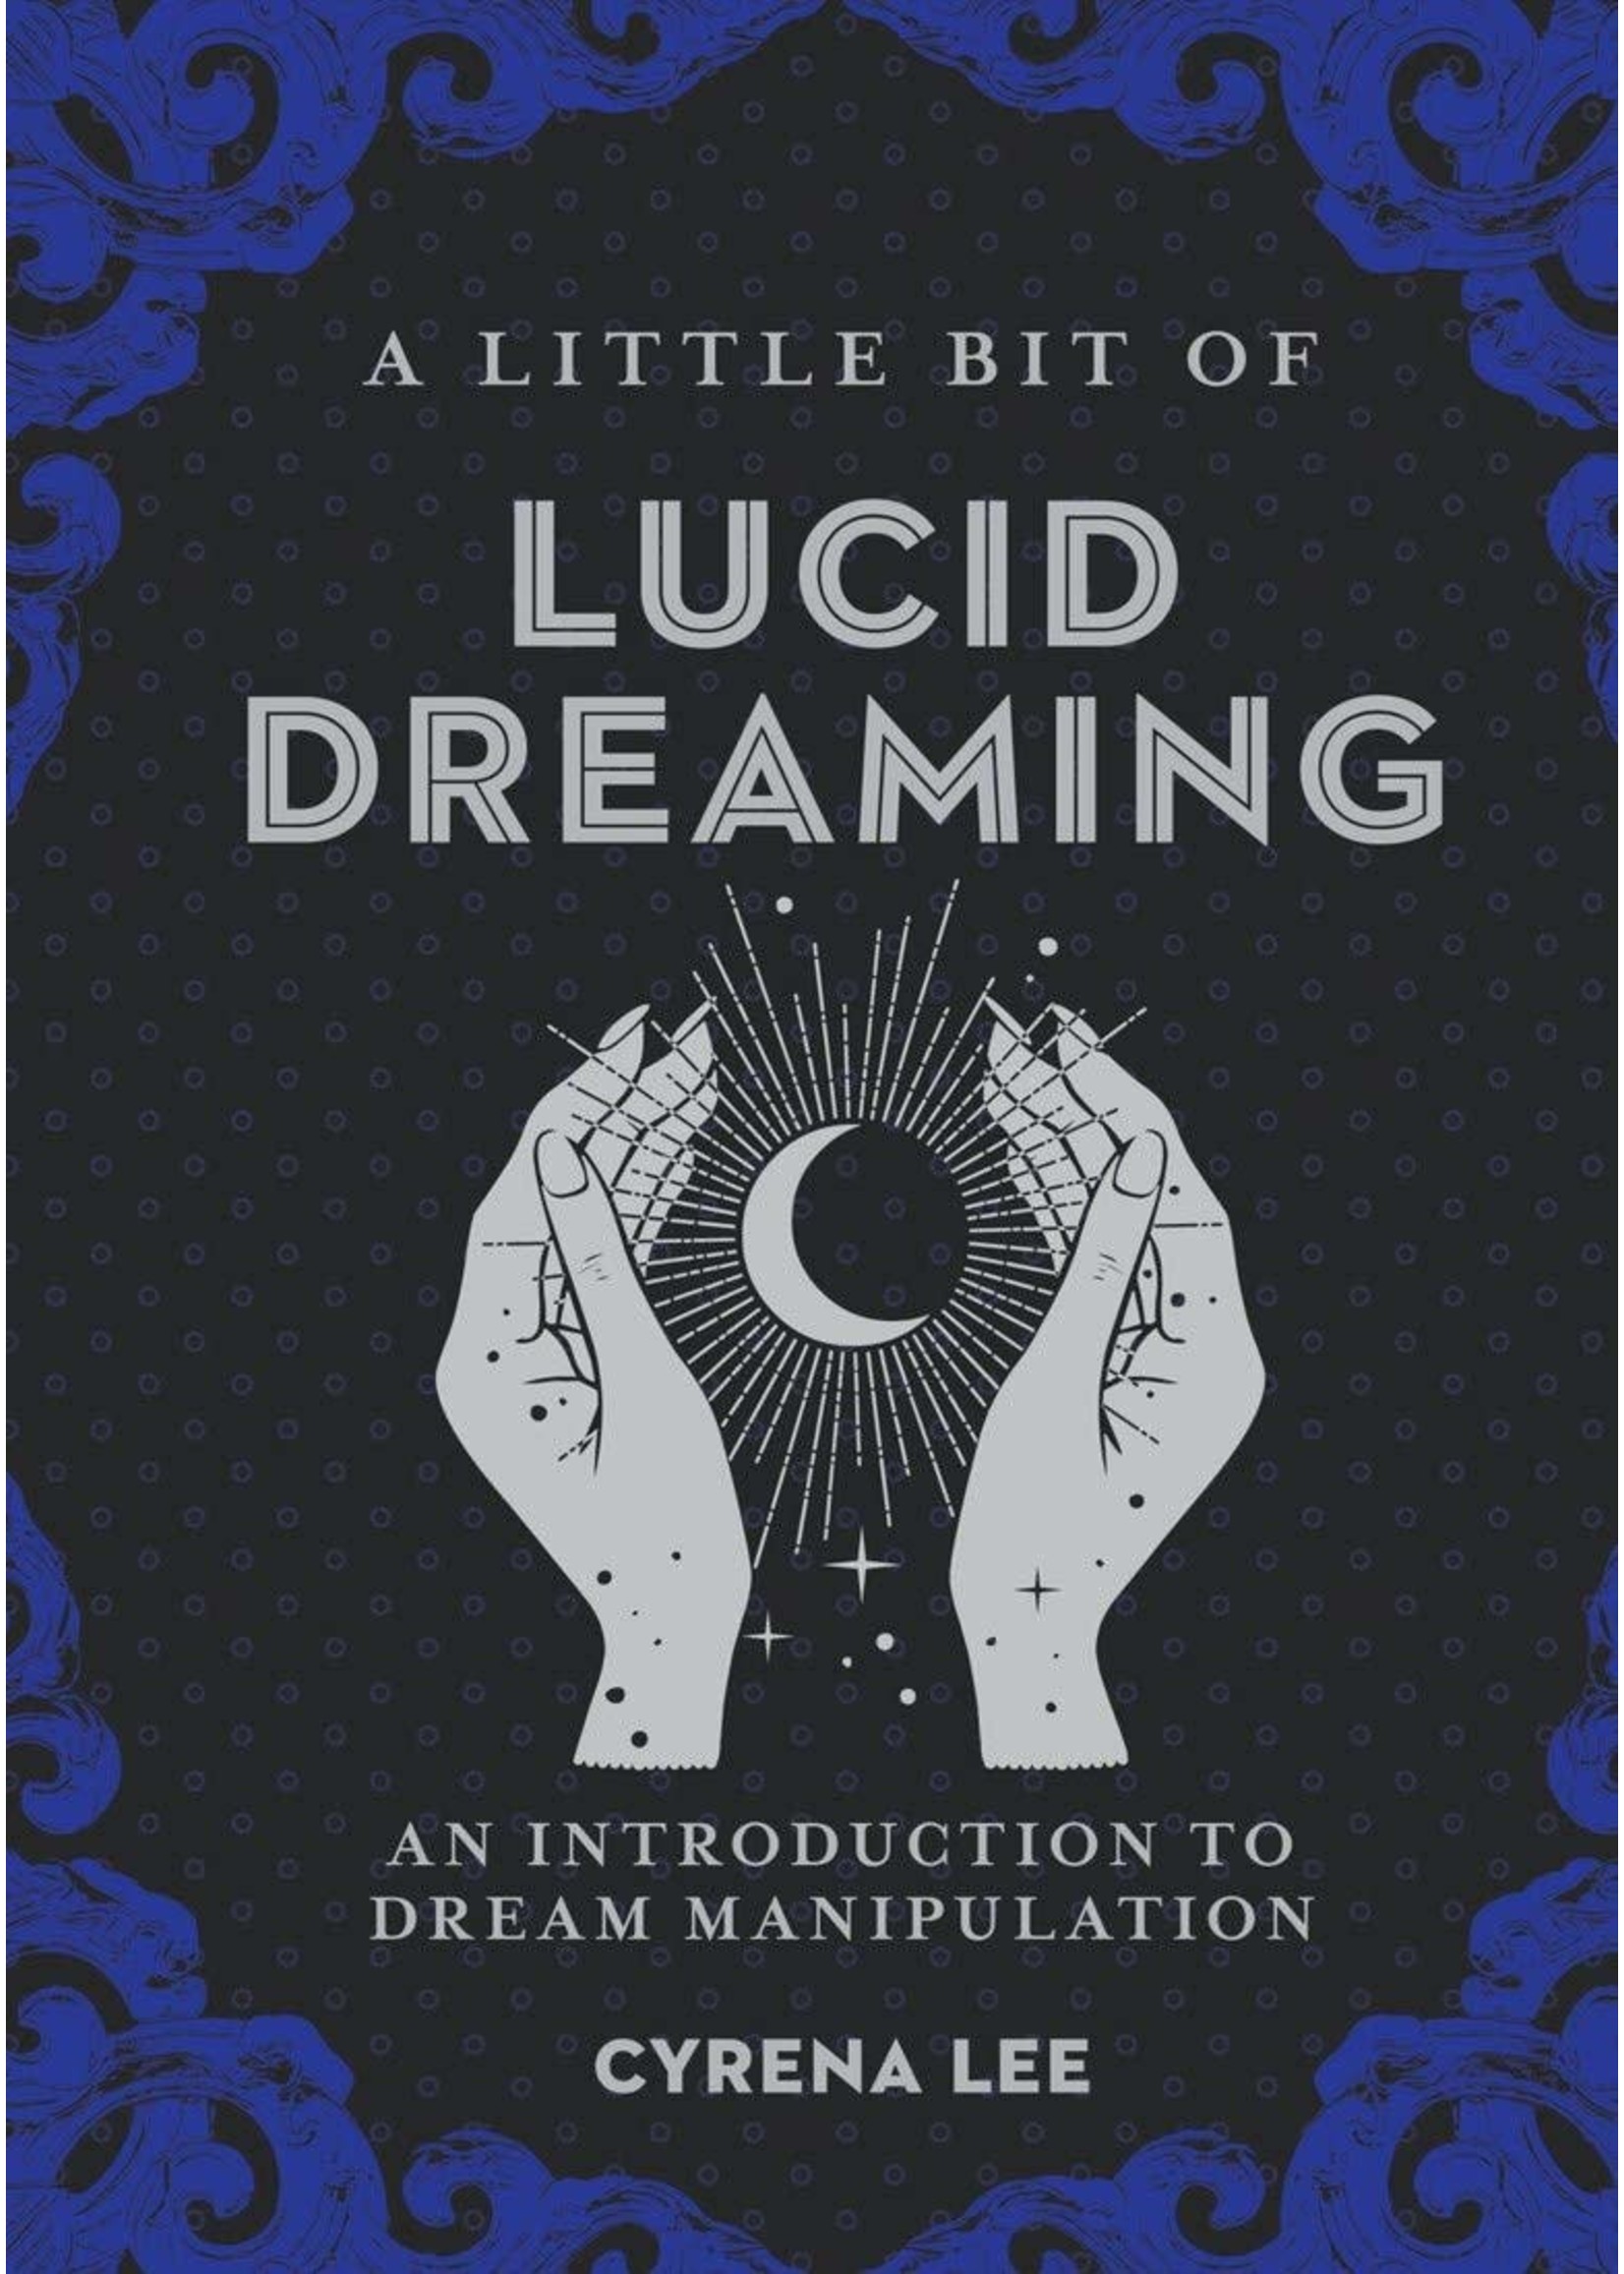 A Little Bit of Lucid Dreaming - An Introduction to Dream Manipulation